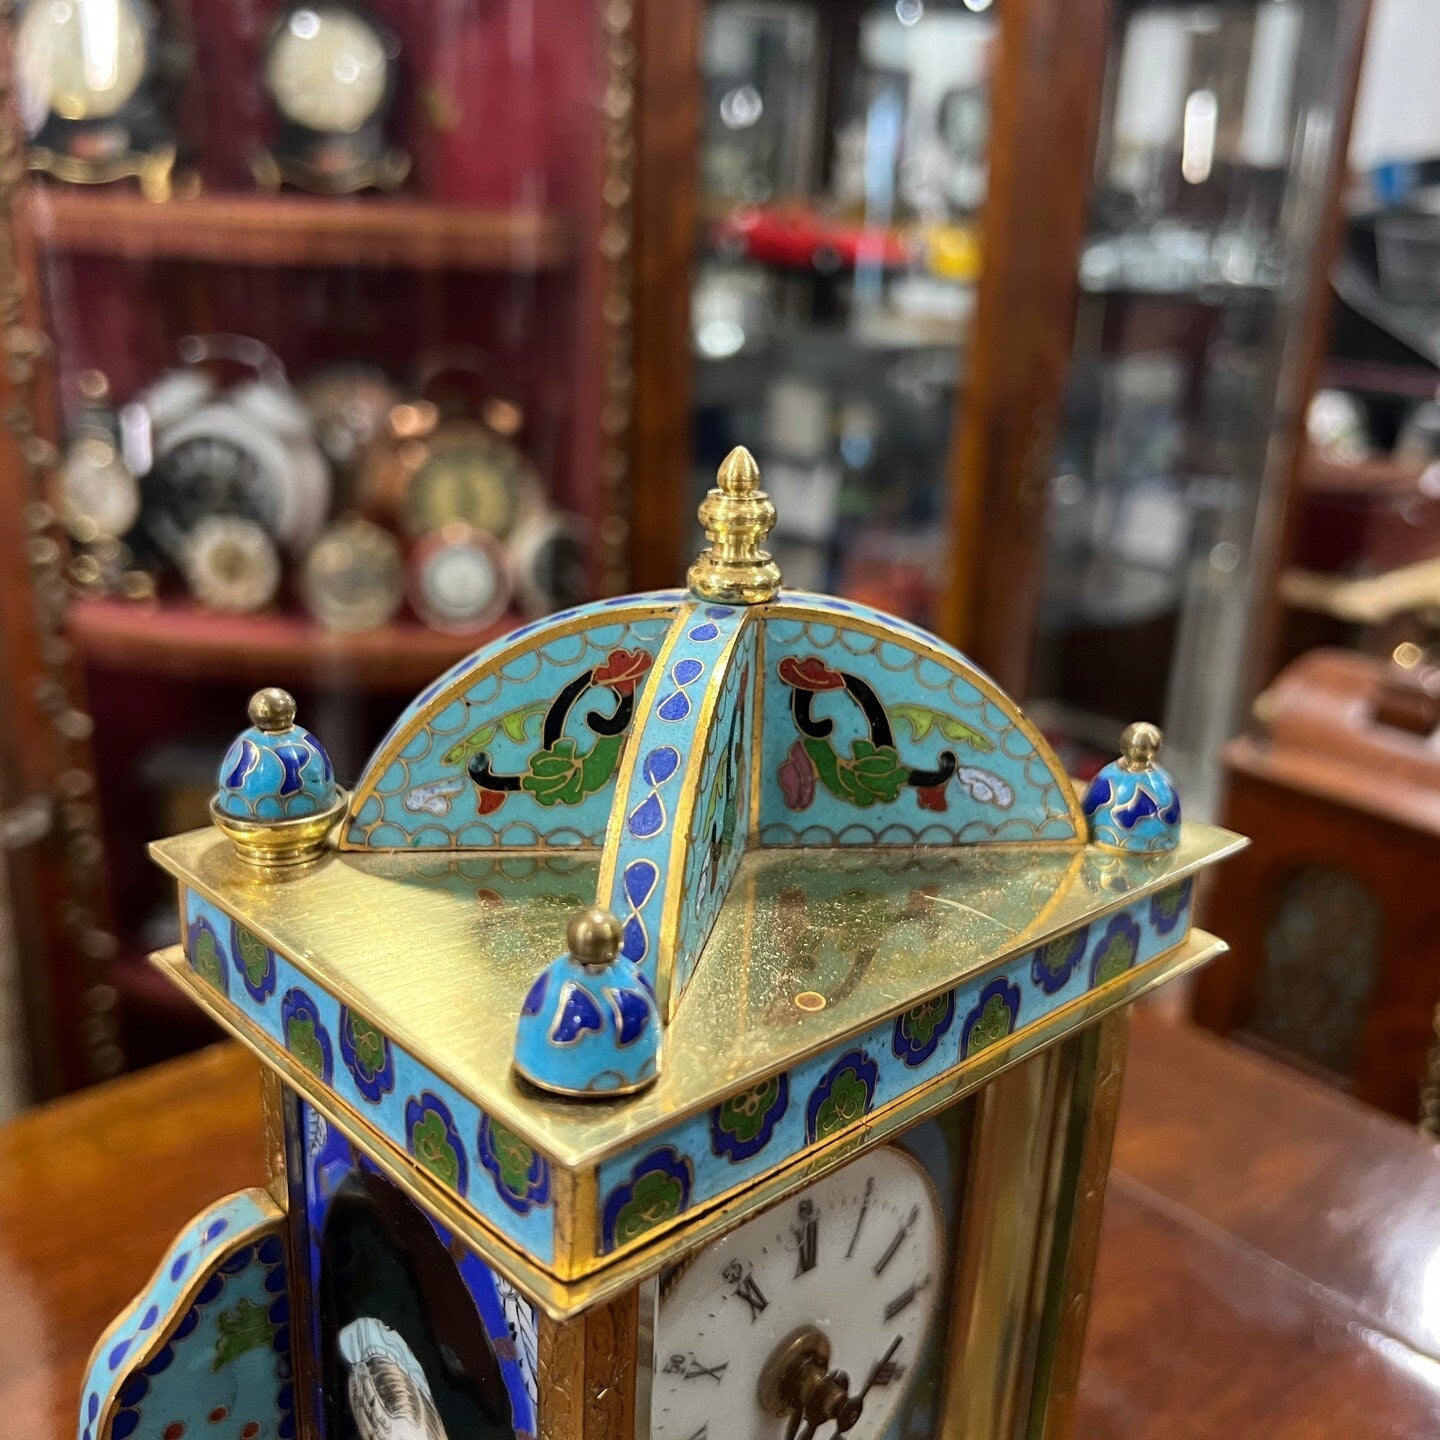 Close-up of a collectible antique enamel brass quartz clock with intricate design on top in perfect condition